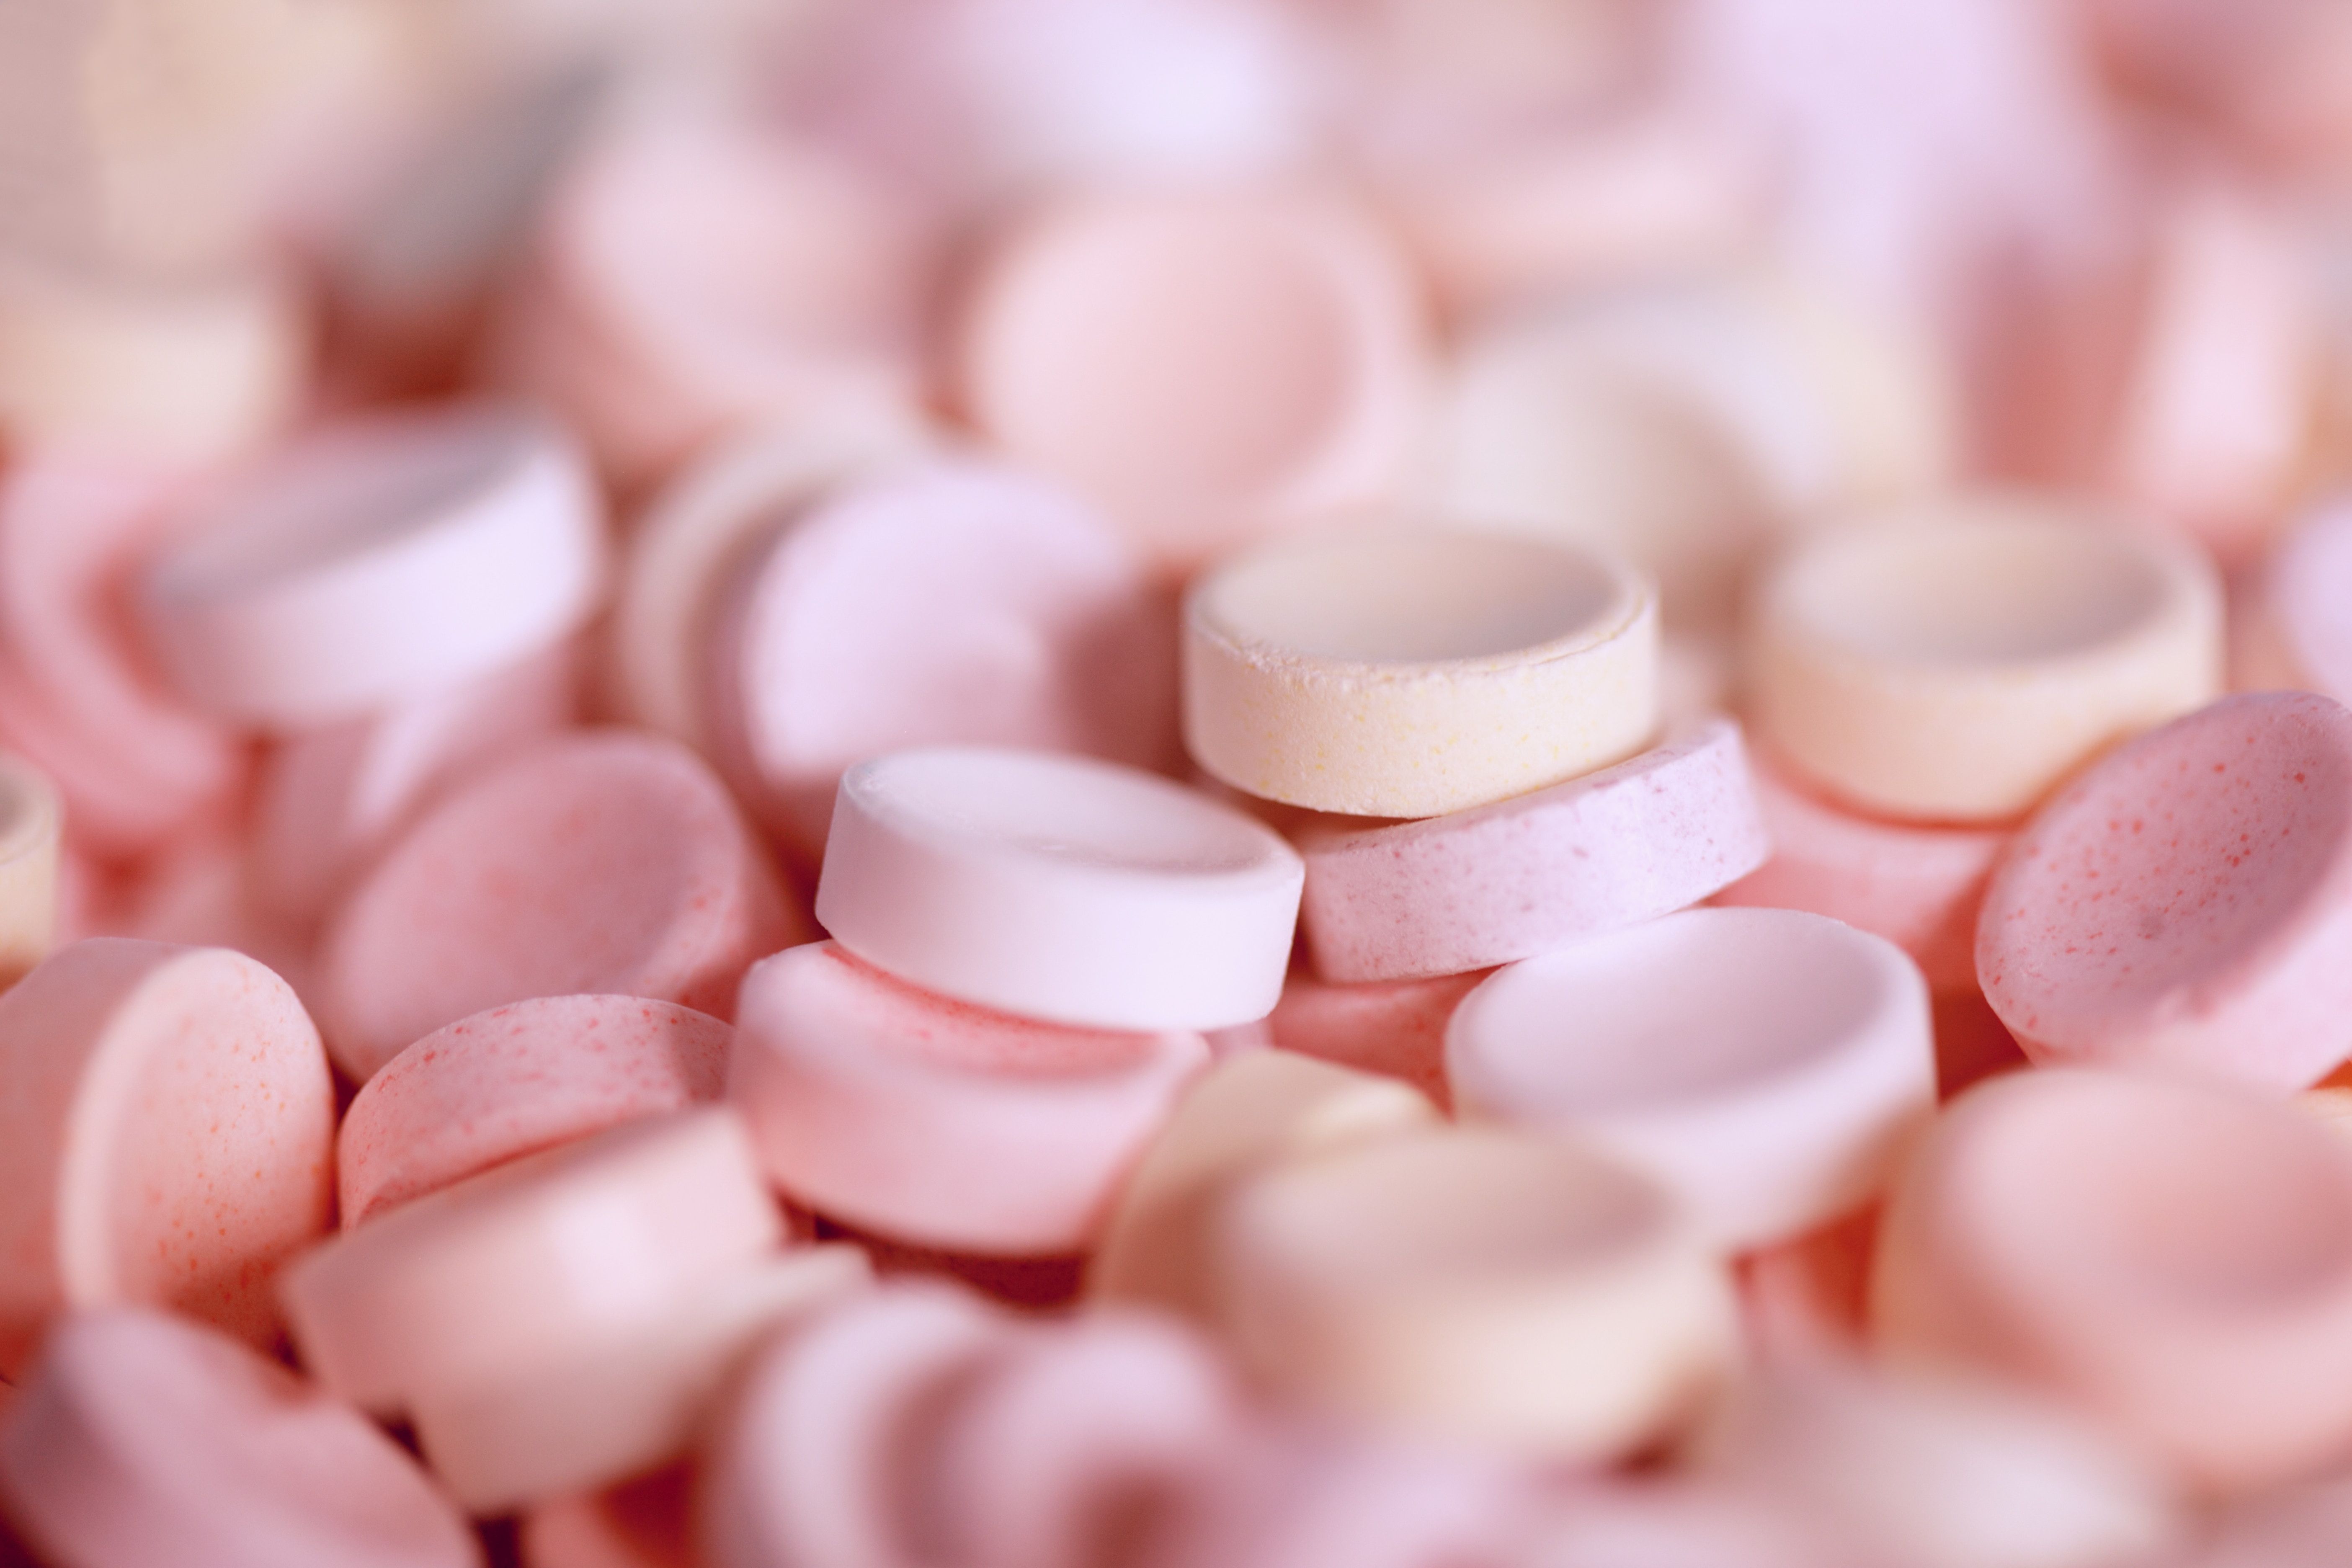 A pile of pink and white round tablets - 